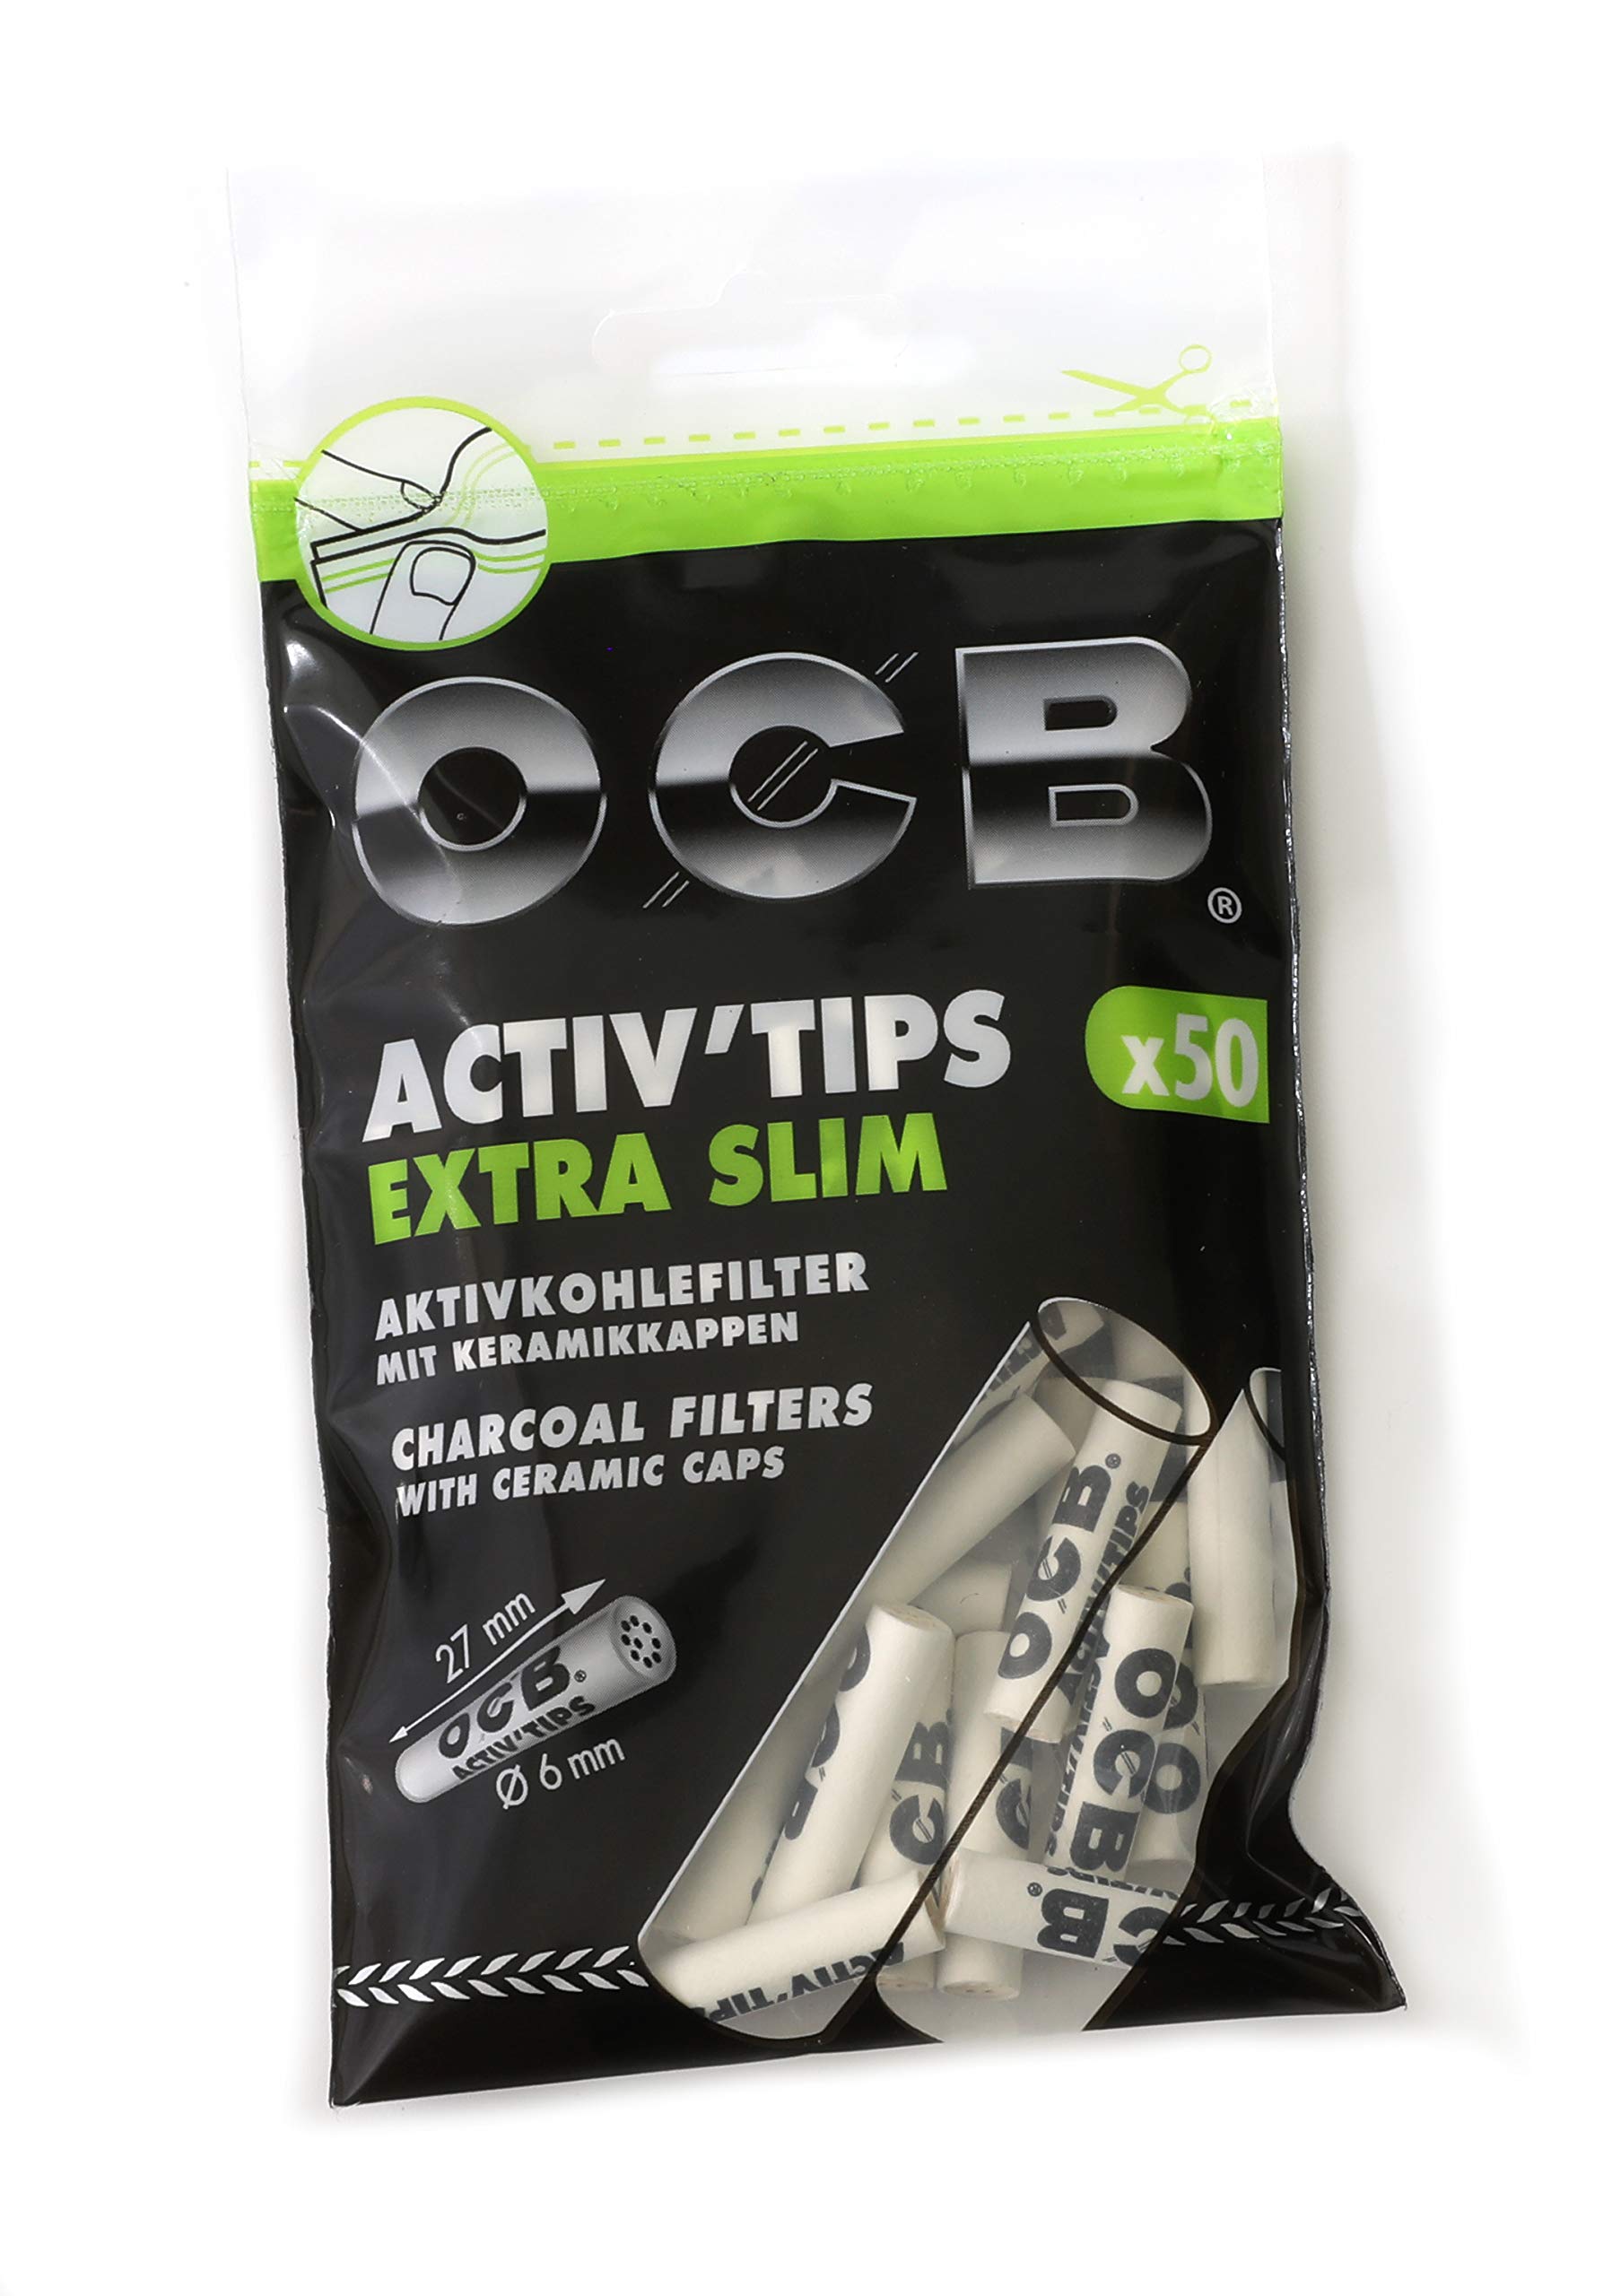  50 OCB Slim 7mm Activated Charcoal Filters ACTIV'TIPS - 1 Box :  Health & Household